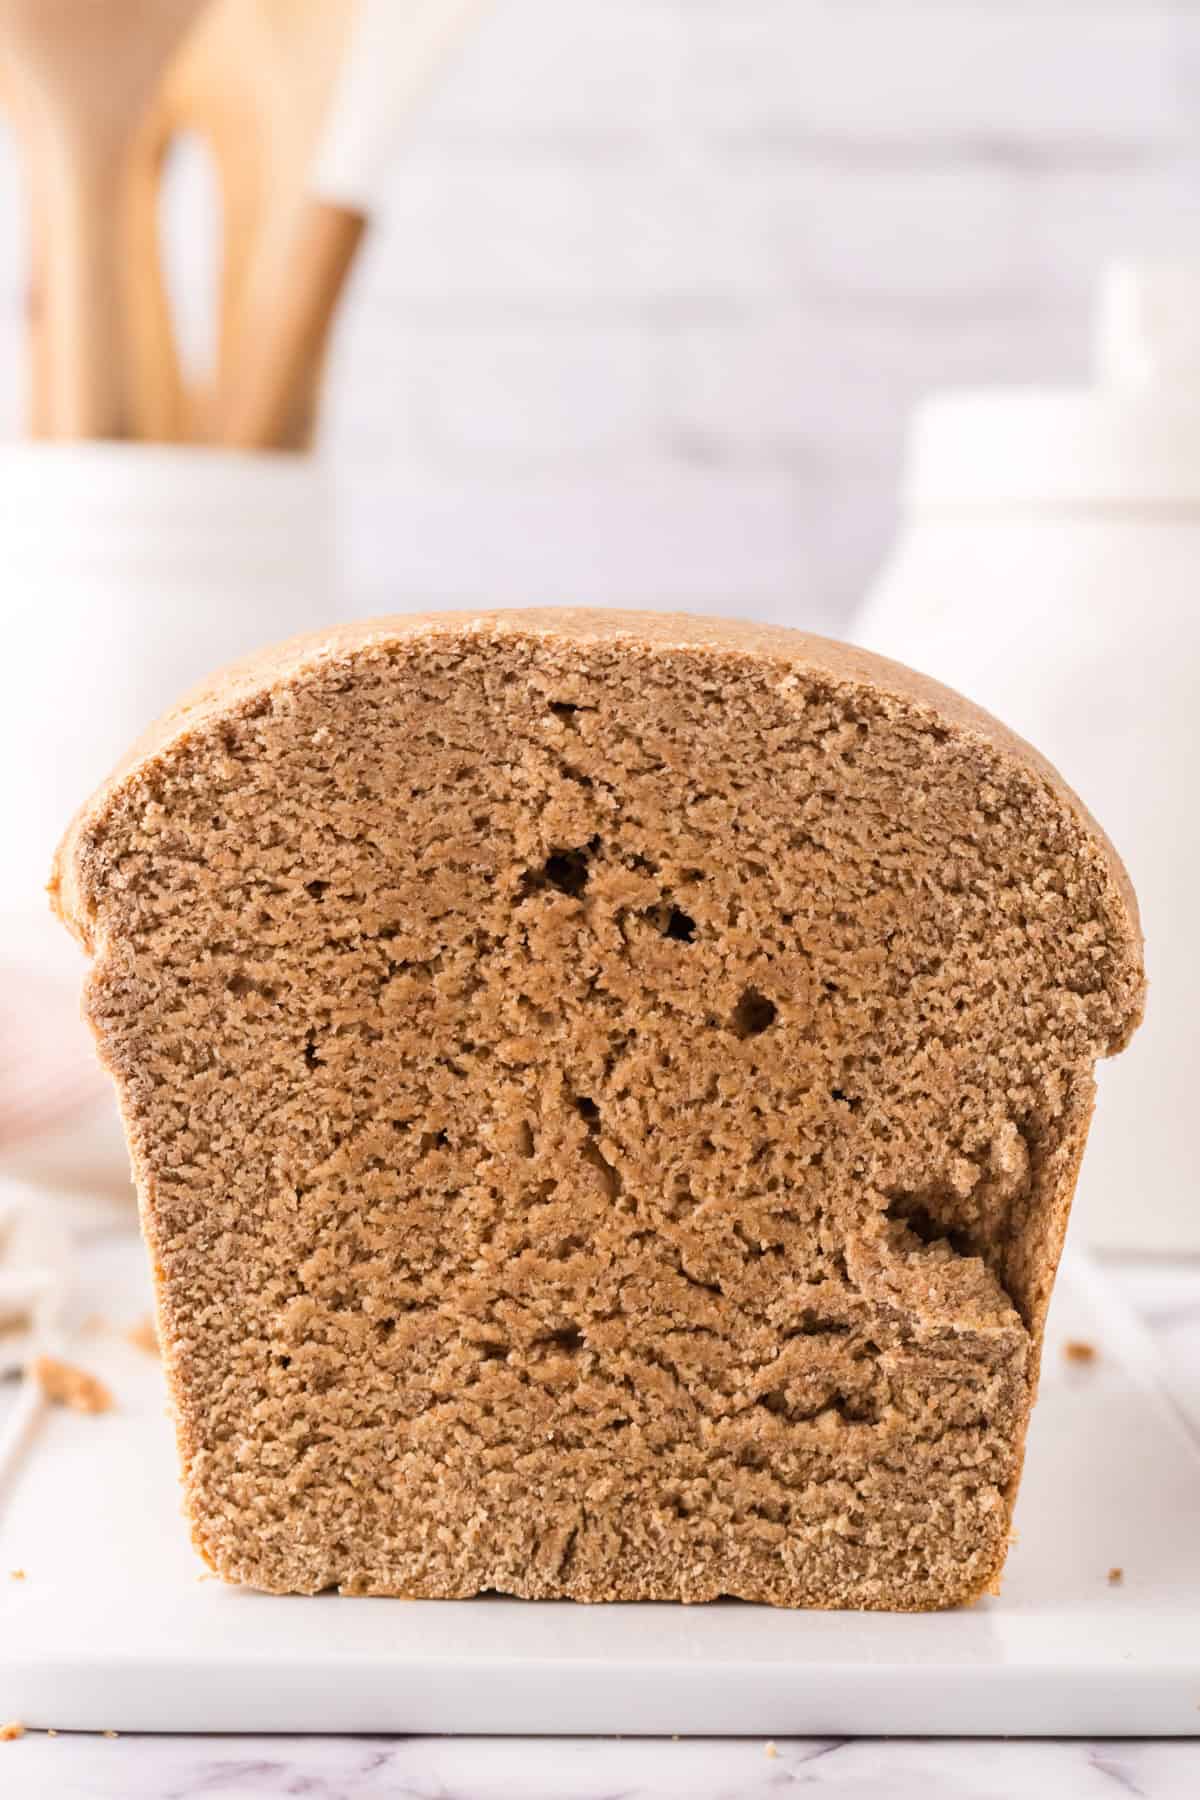 a loaf of whole wheat sandwich bread sliced.